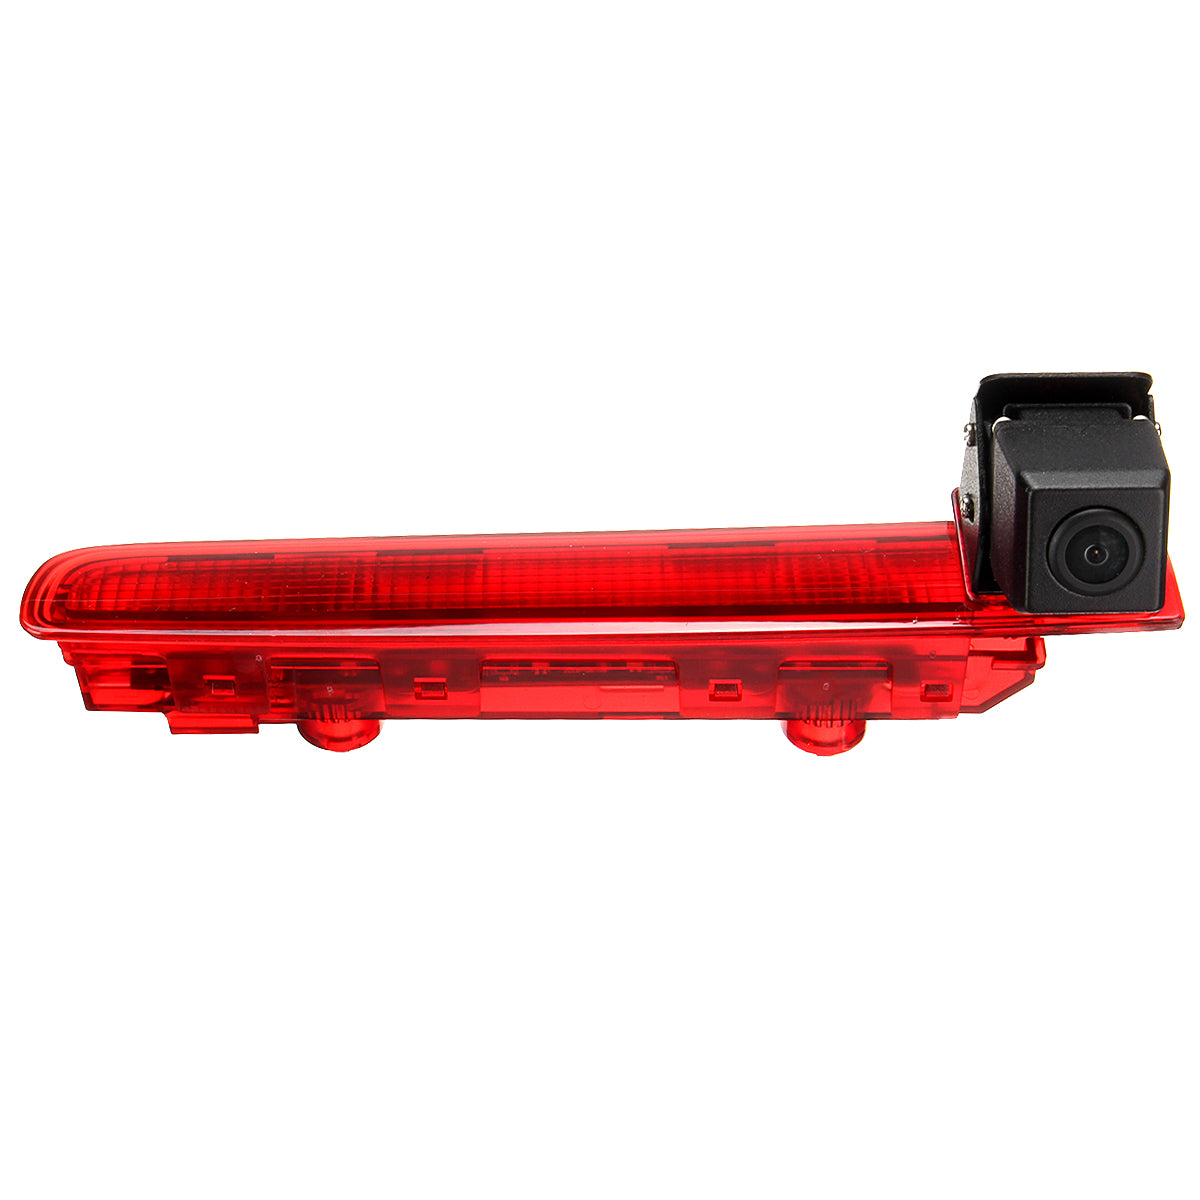 Car 170° Third Brake Light Rearview Mounting Monitor With Camera For VW Transporter T5&T6 Van 2003+ - Auto GoShop